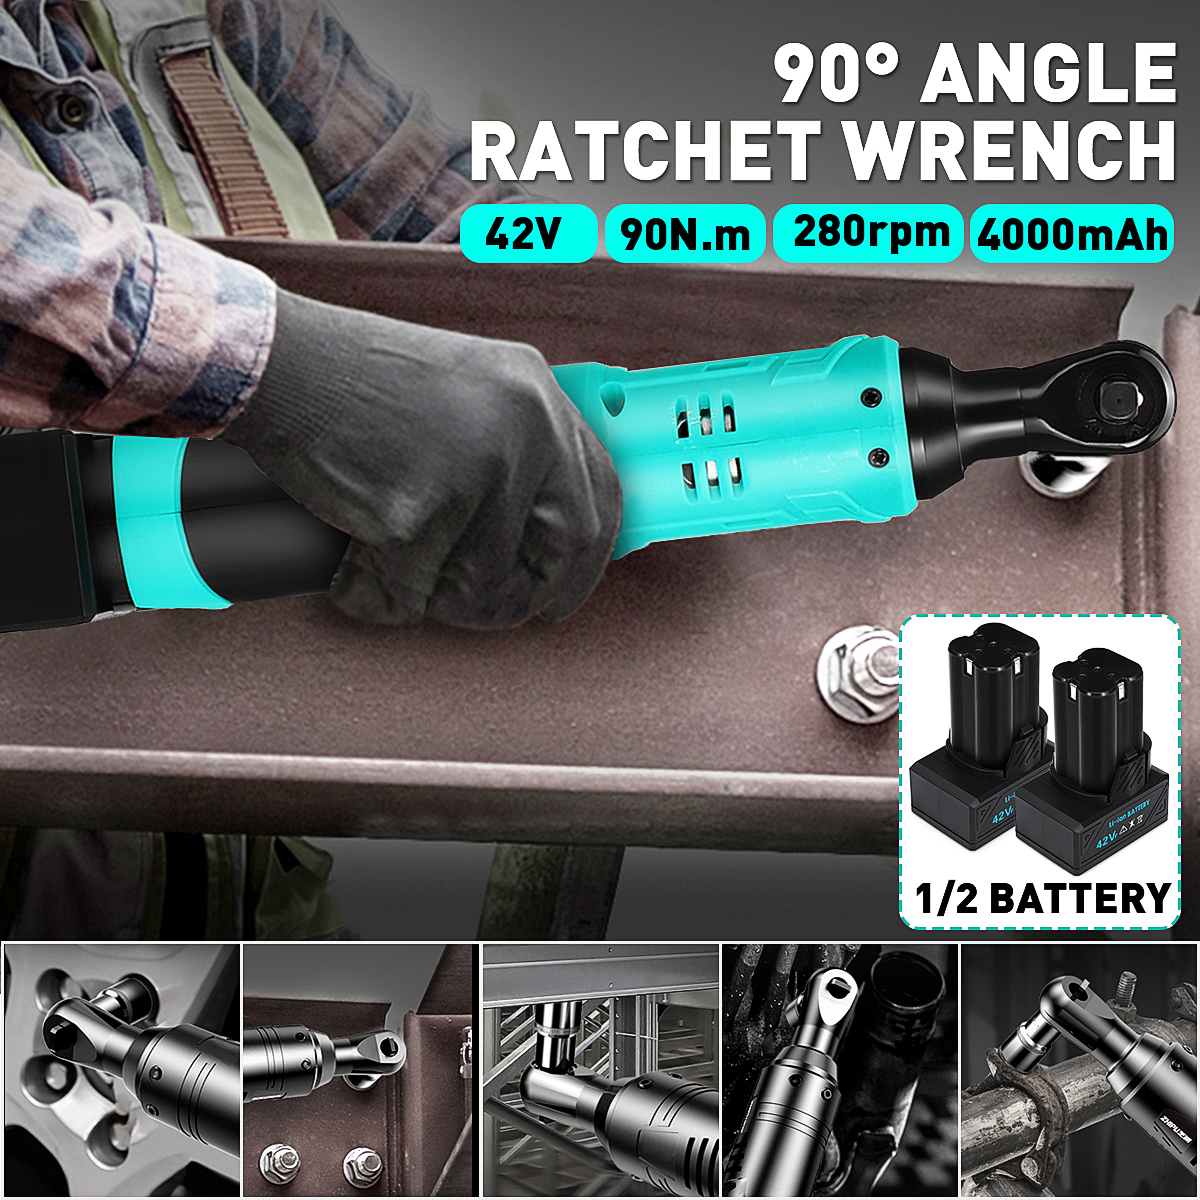 4000mAh-280RPM-Electric-Wrench-38quot-Cordless-Ratchet-42V-Rechargeable-90Nm-Right-Angle-Wrench-1725587-1